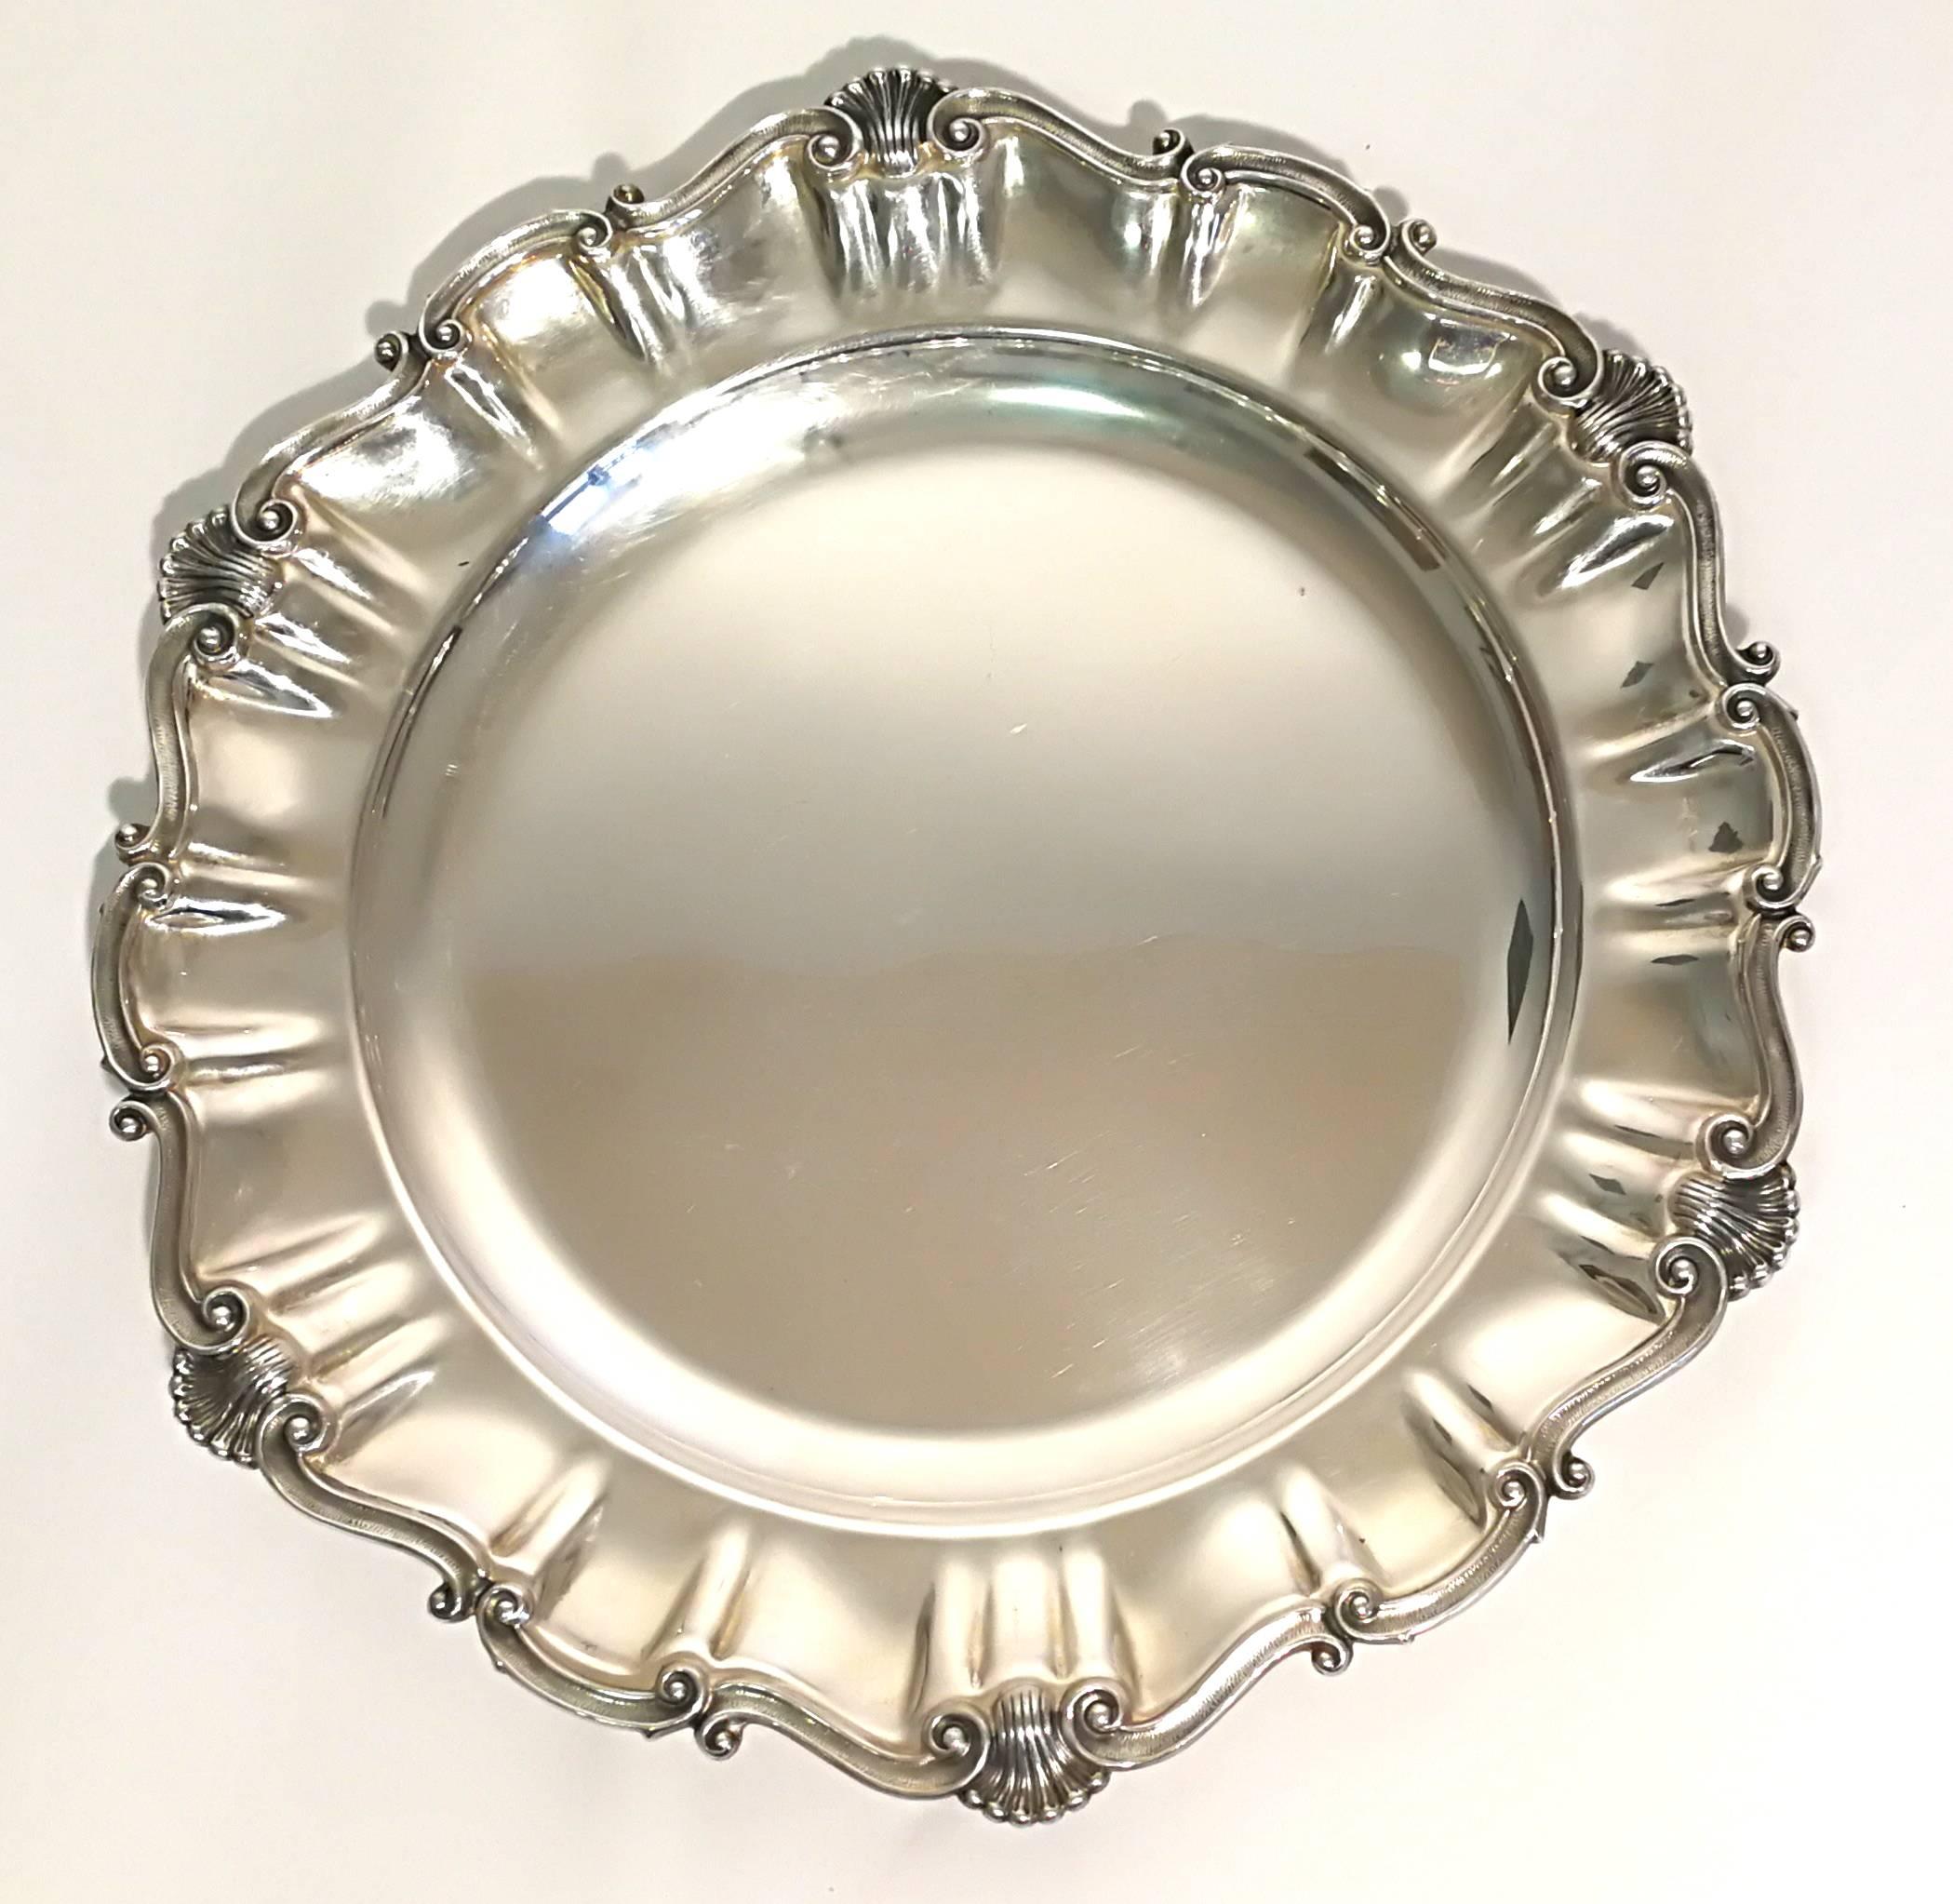 Very nice silver dish plate, excellent conditions. The edges are beautifully decorated.